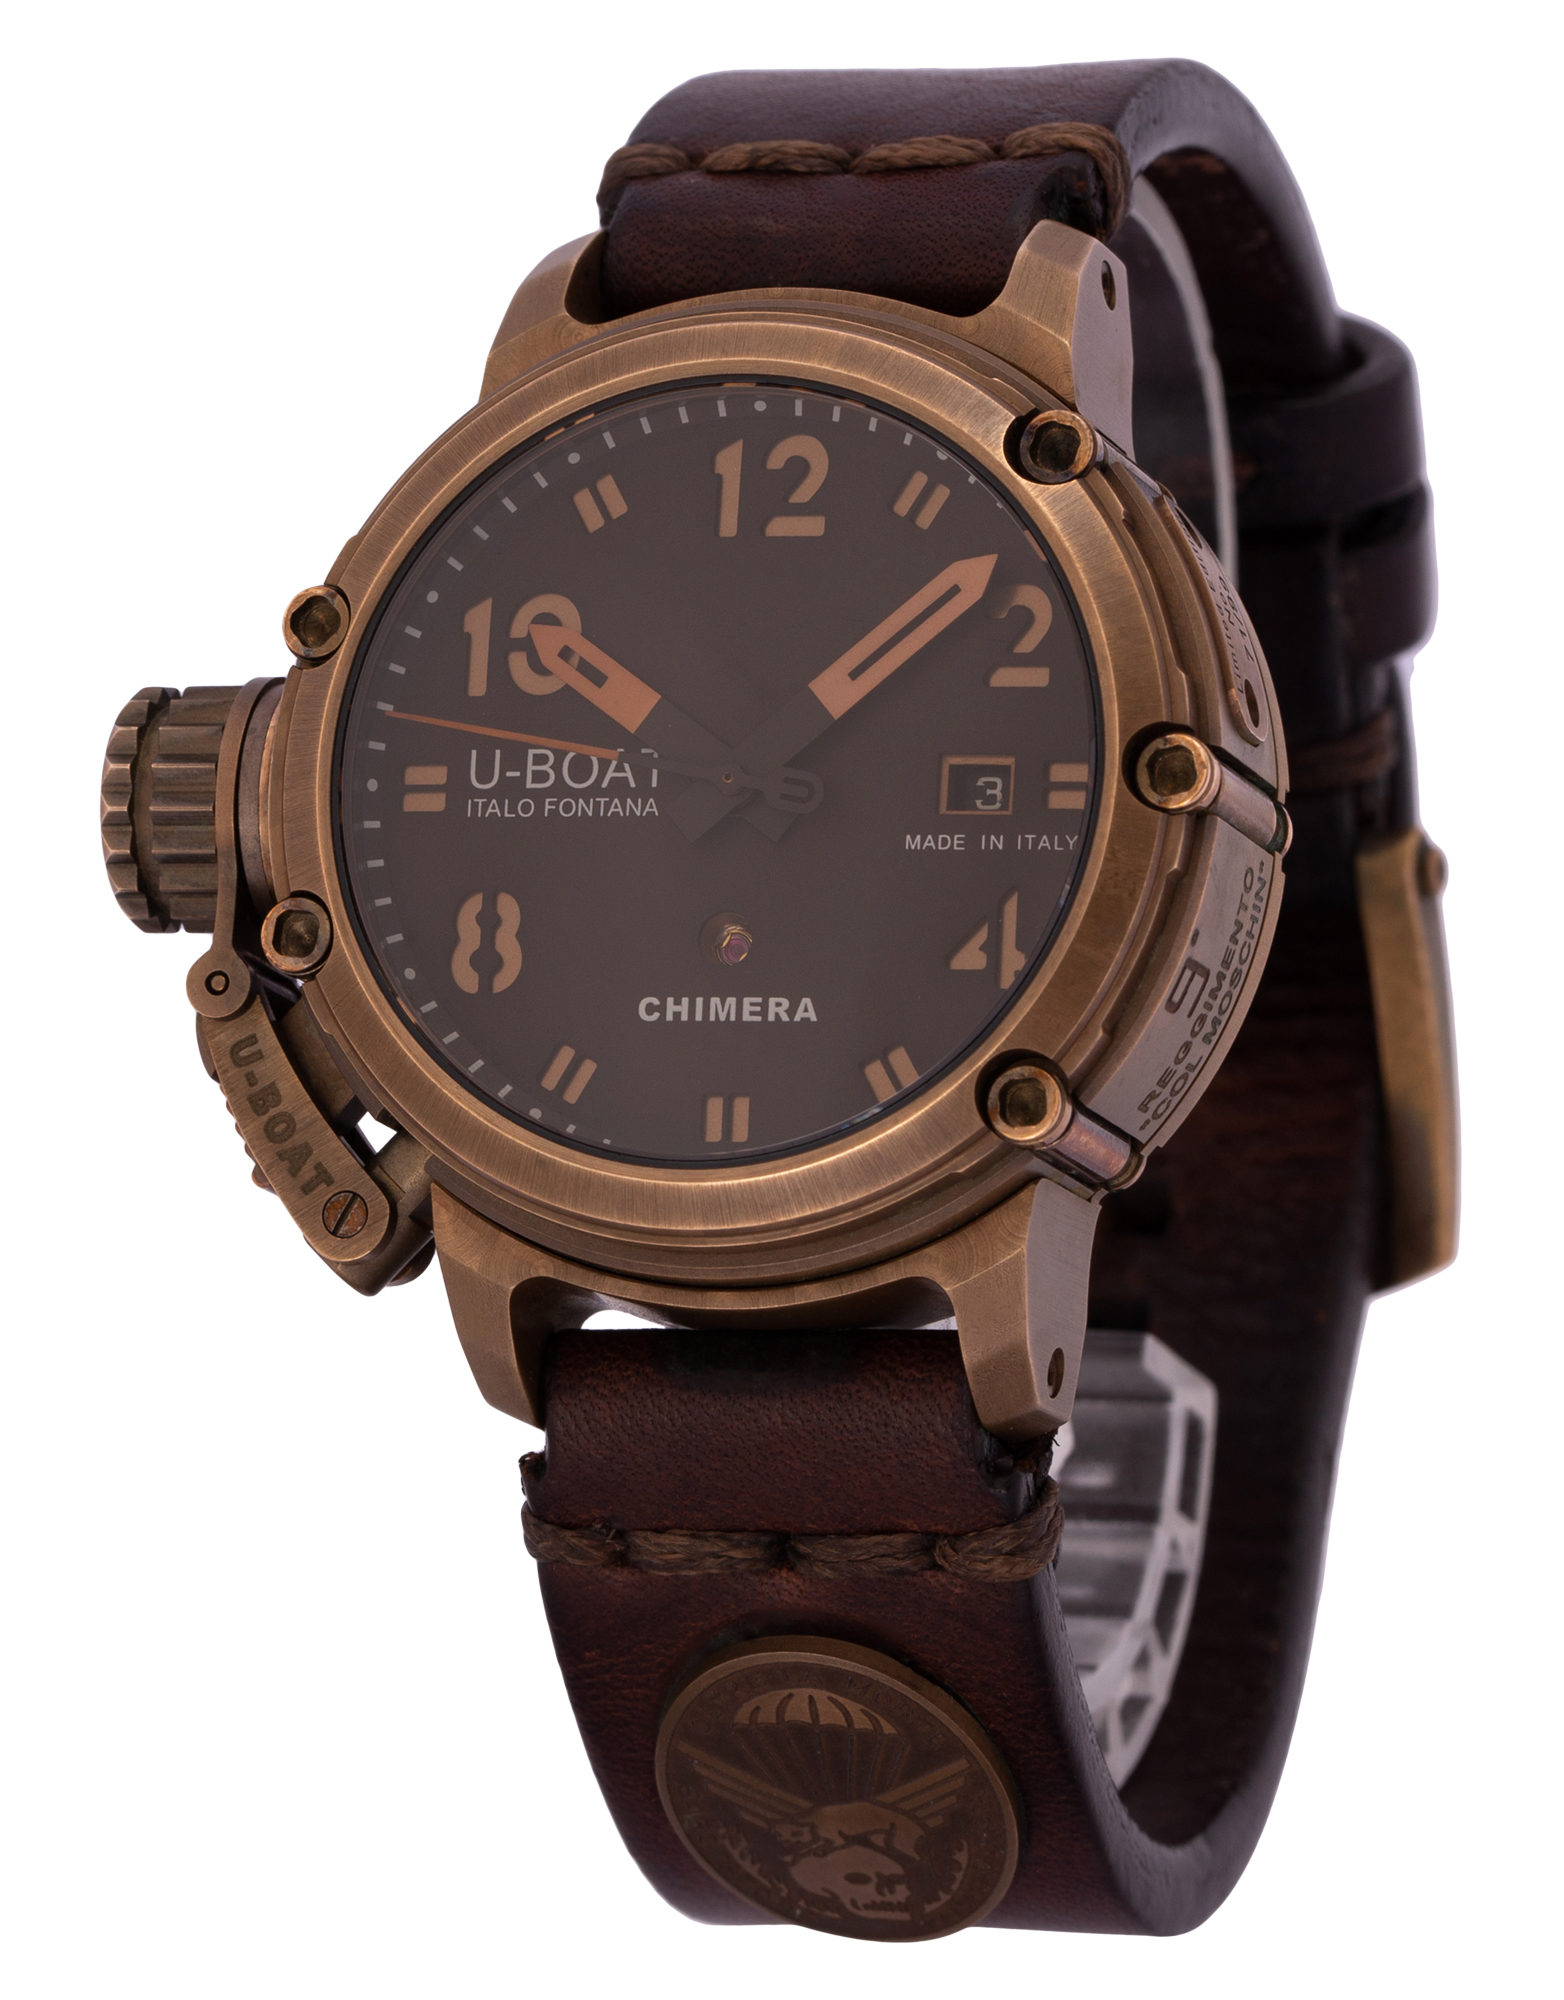 U-Boat 2016 pre-owned Chimera Bronze Limited Edition 43mm - Black